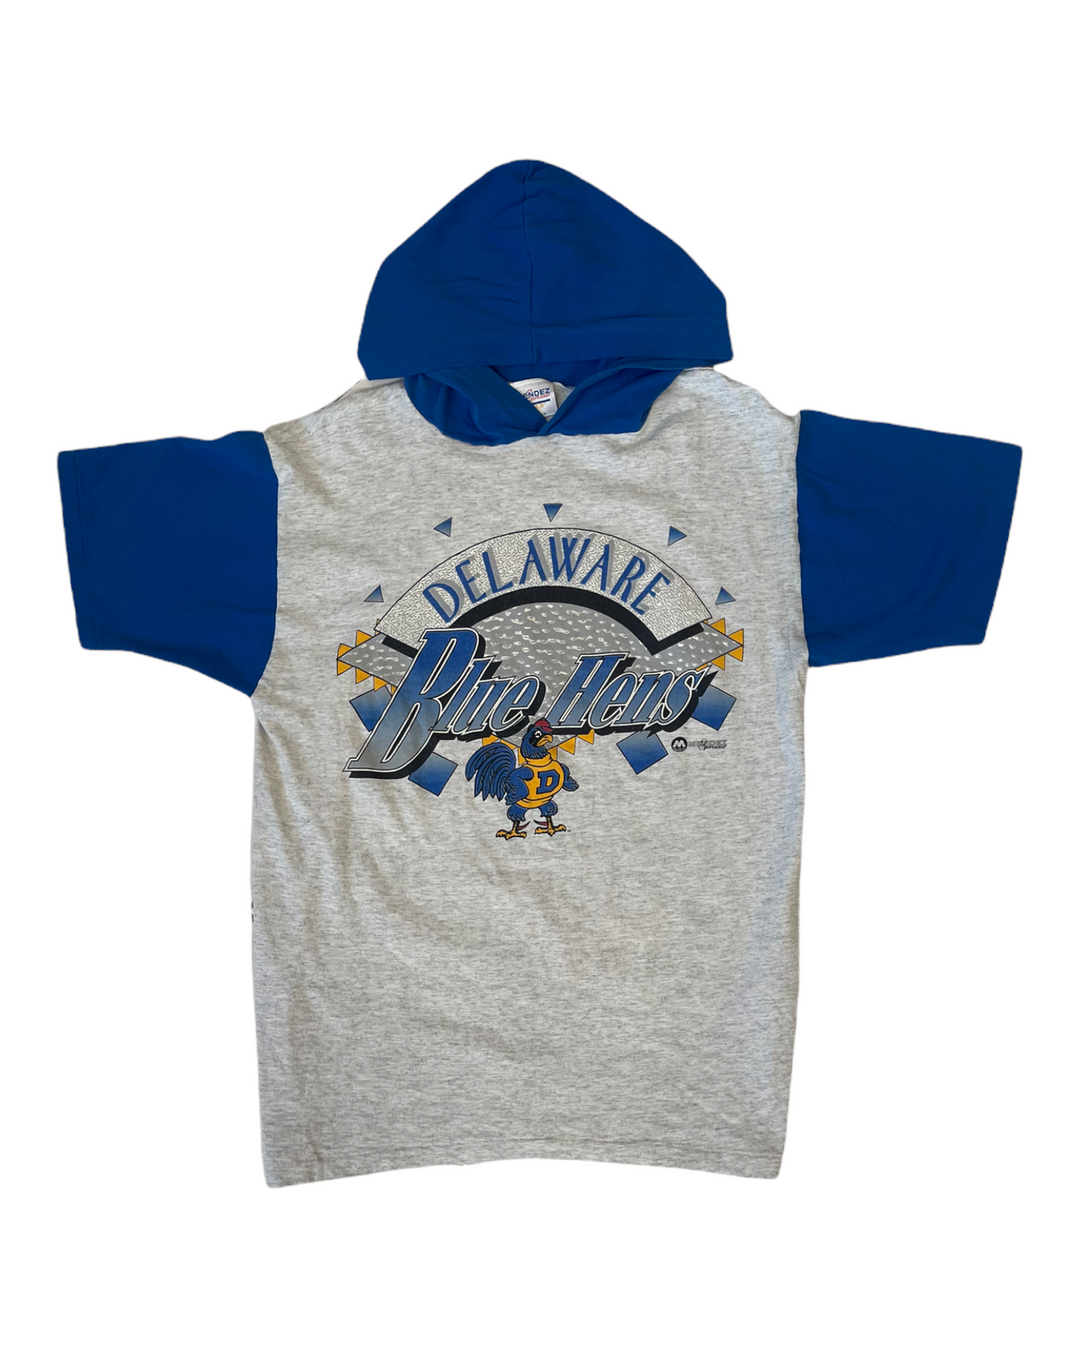 Delaware Vintage Graphic Hooded T-Shirt